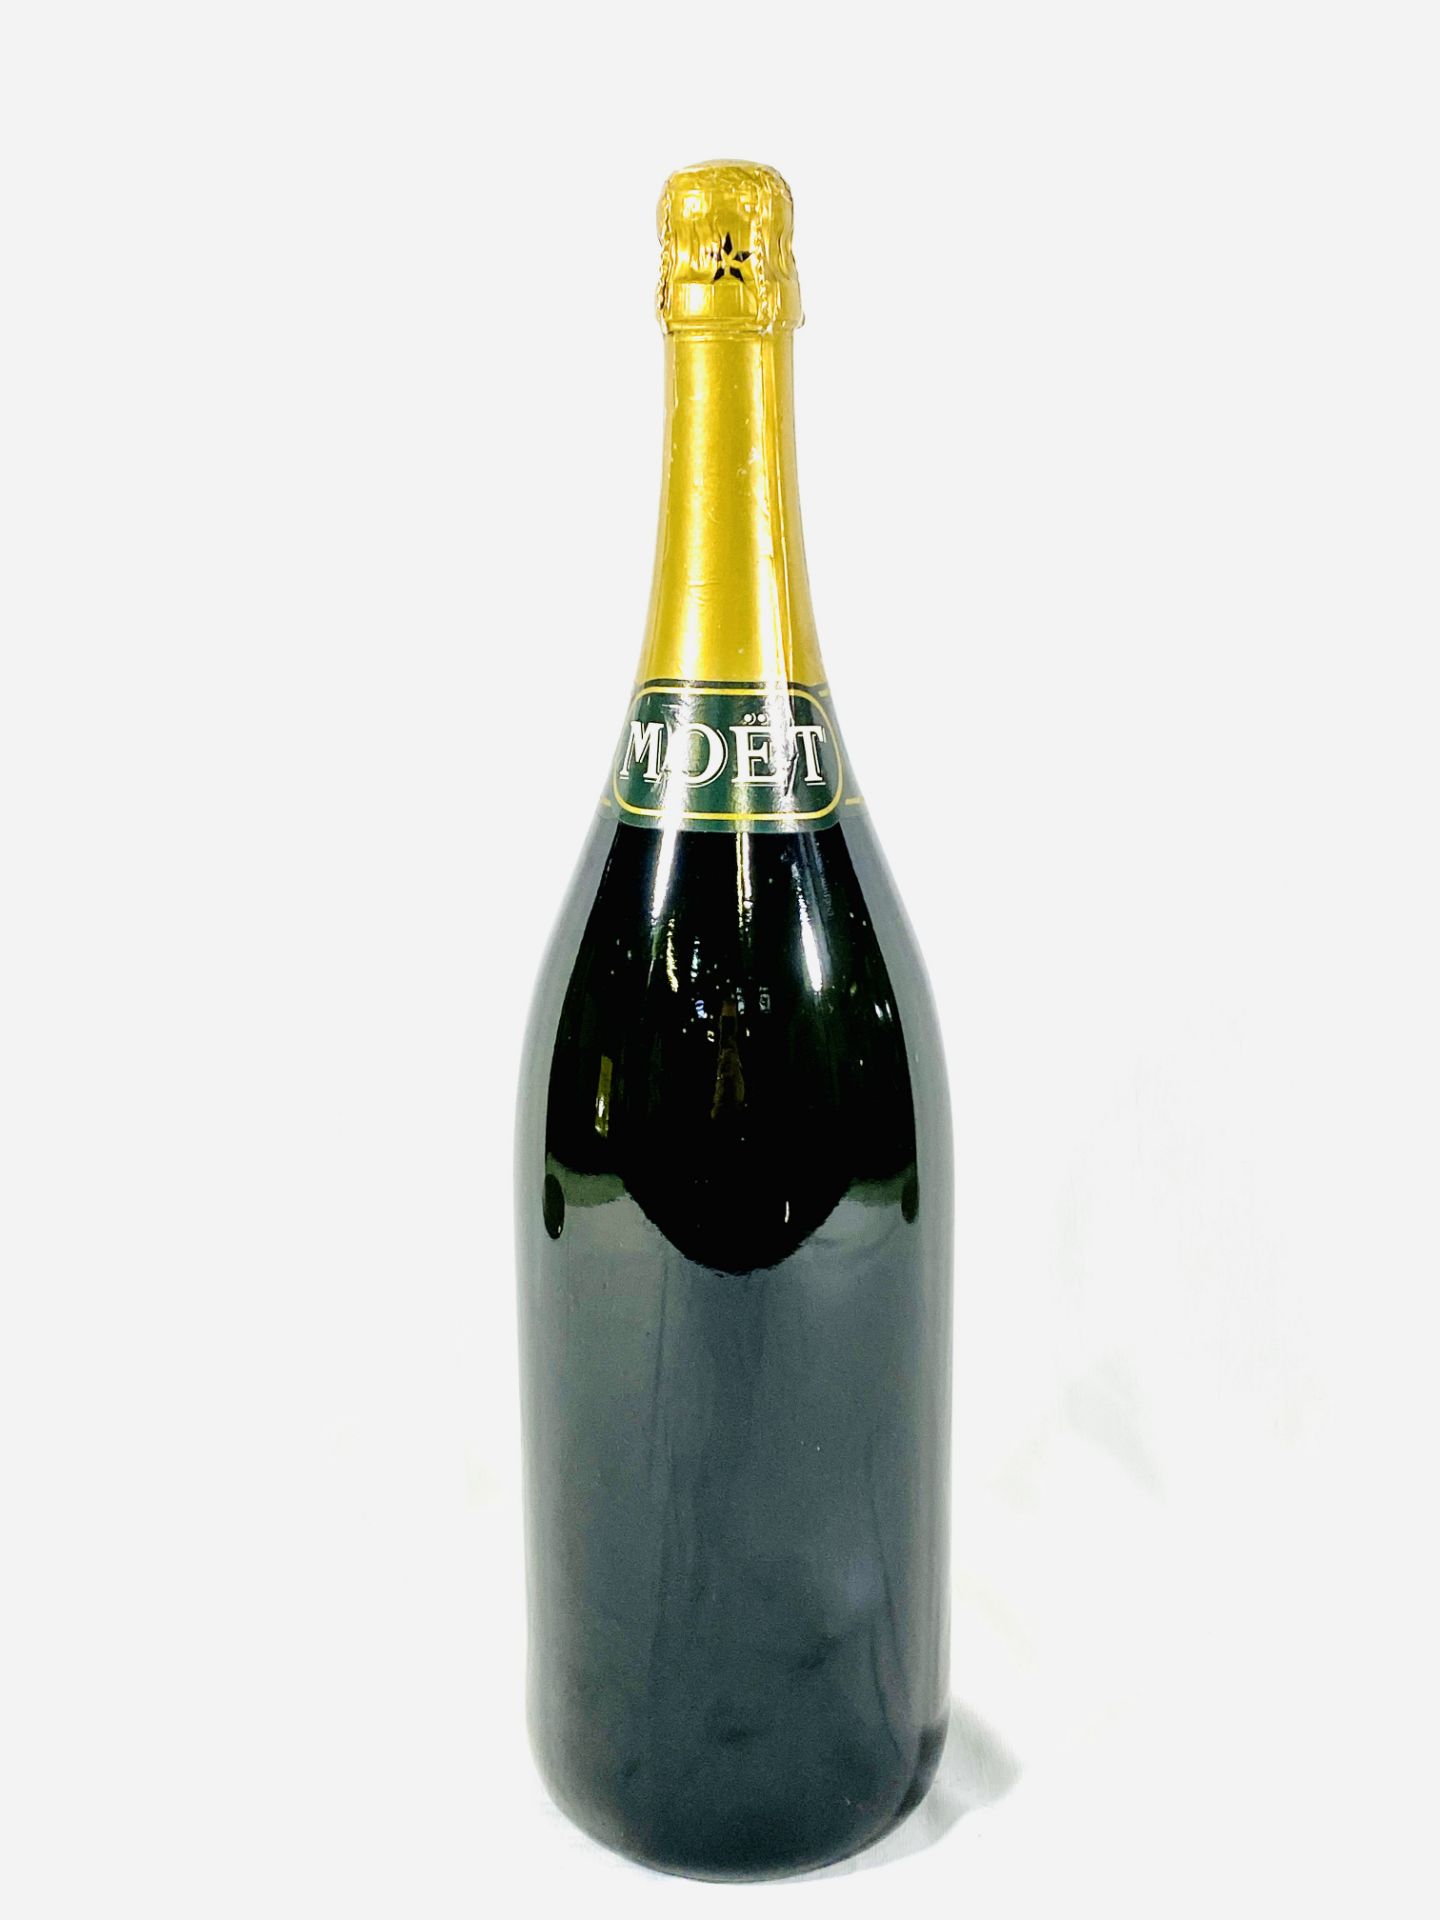 Jeroboam of Moet and Chandon champagne - Image 4 of 5